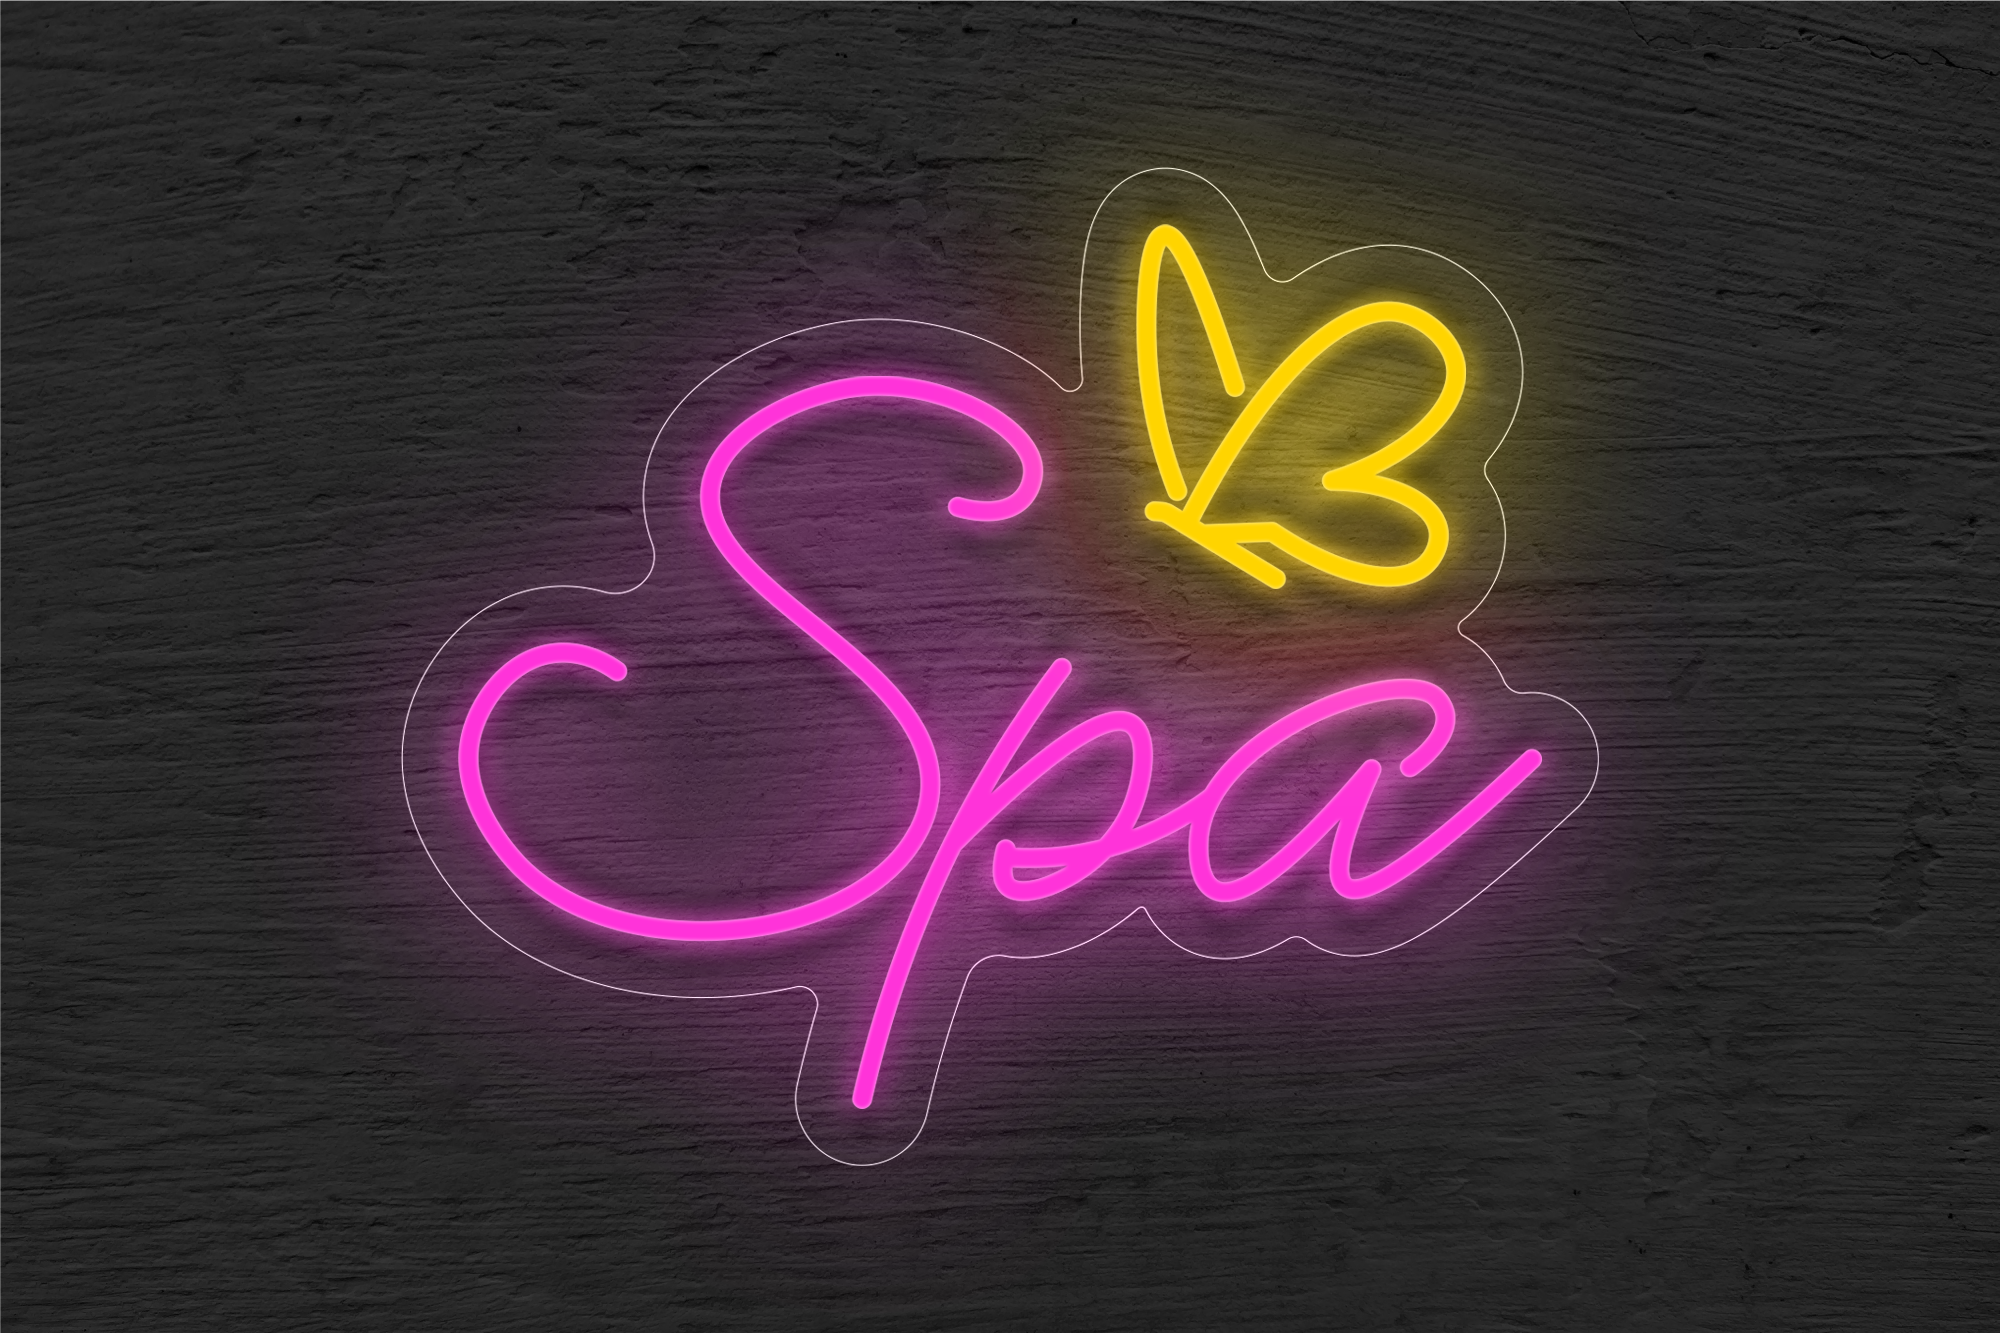 "Spa" with Butterfly LED Neon Sign